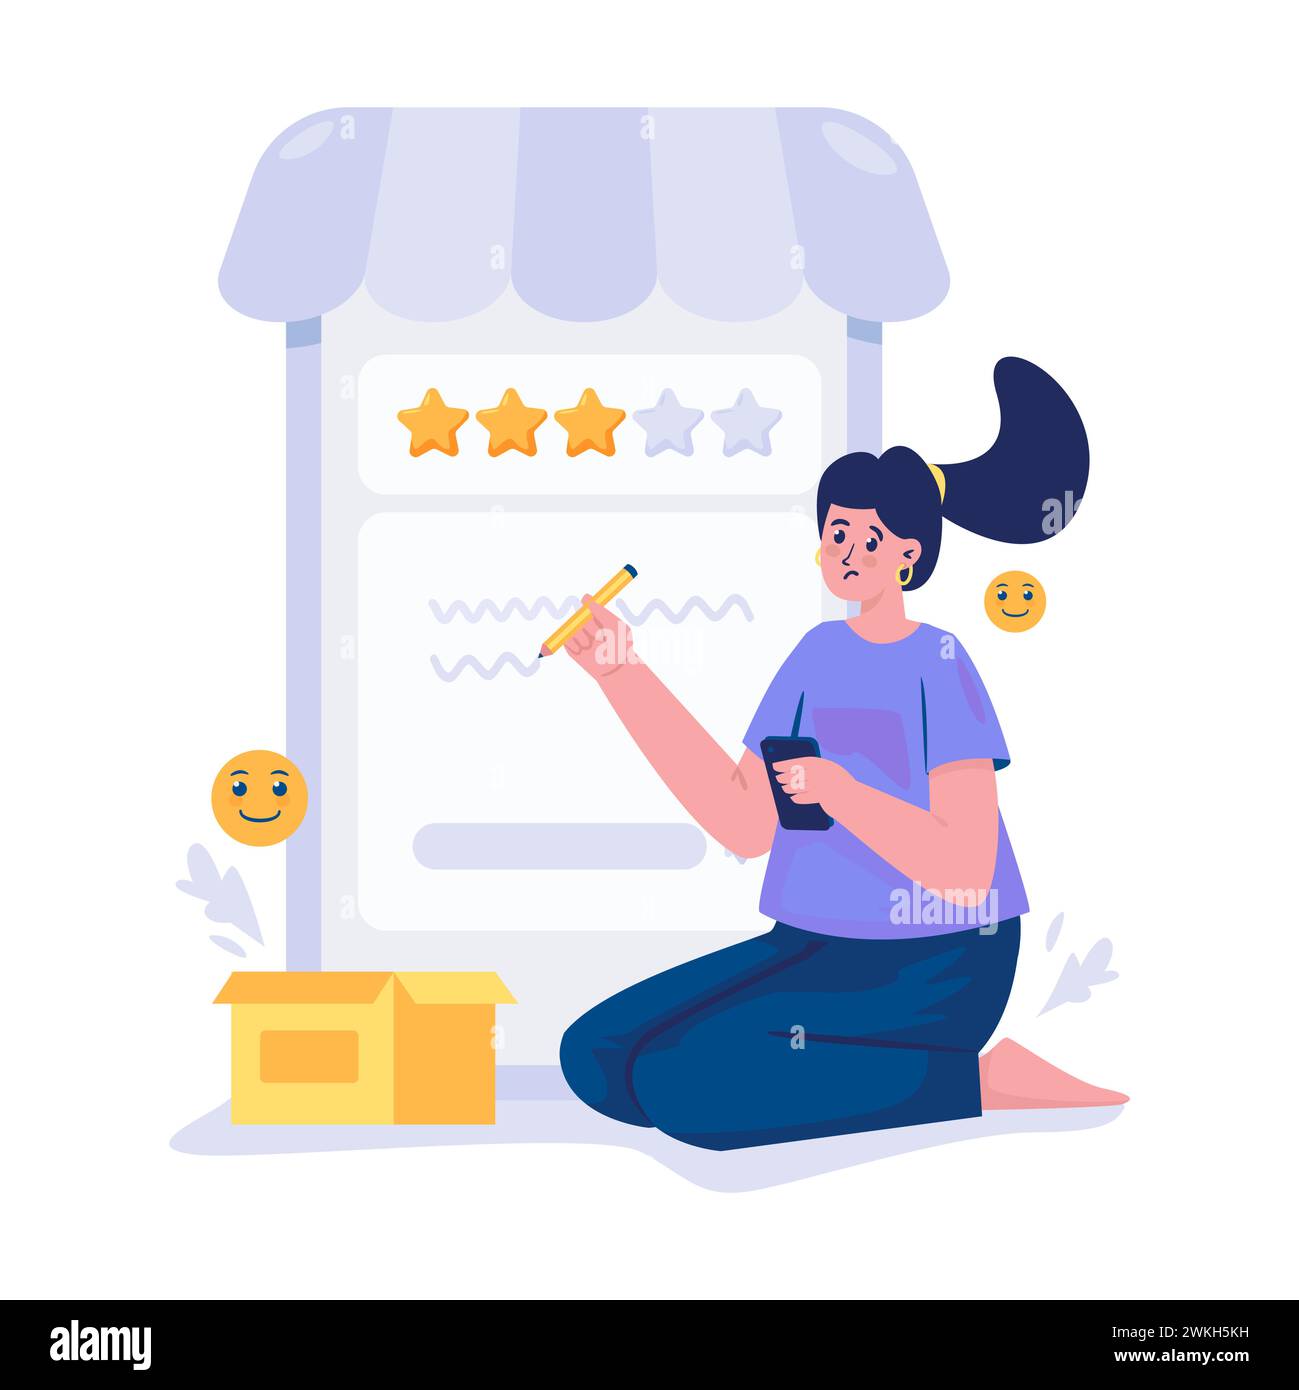 Write a feedback comment and give a 3-star rating illustration Stock Vector